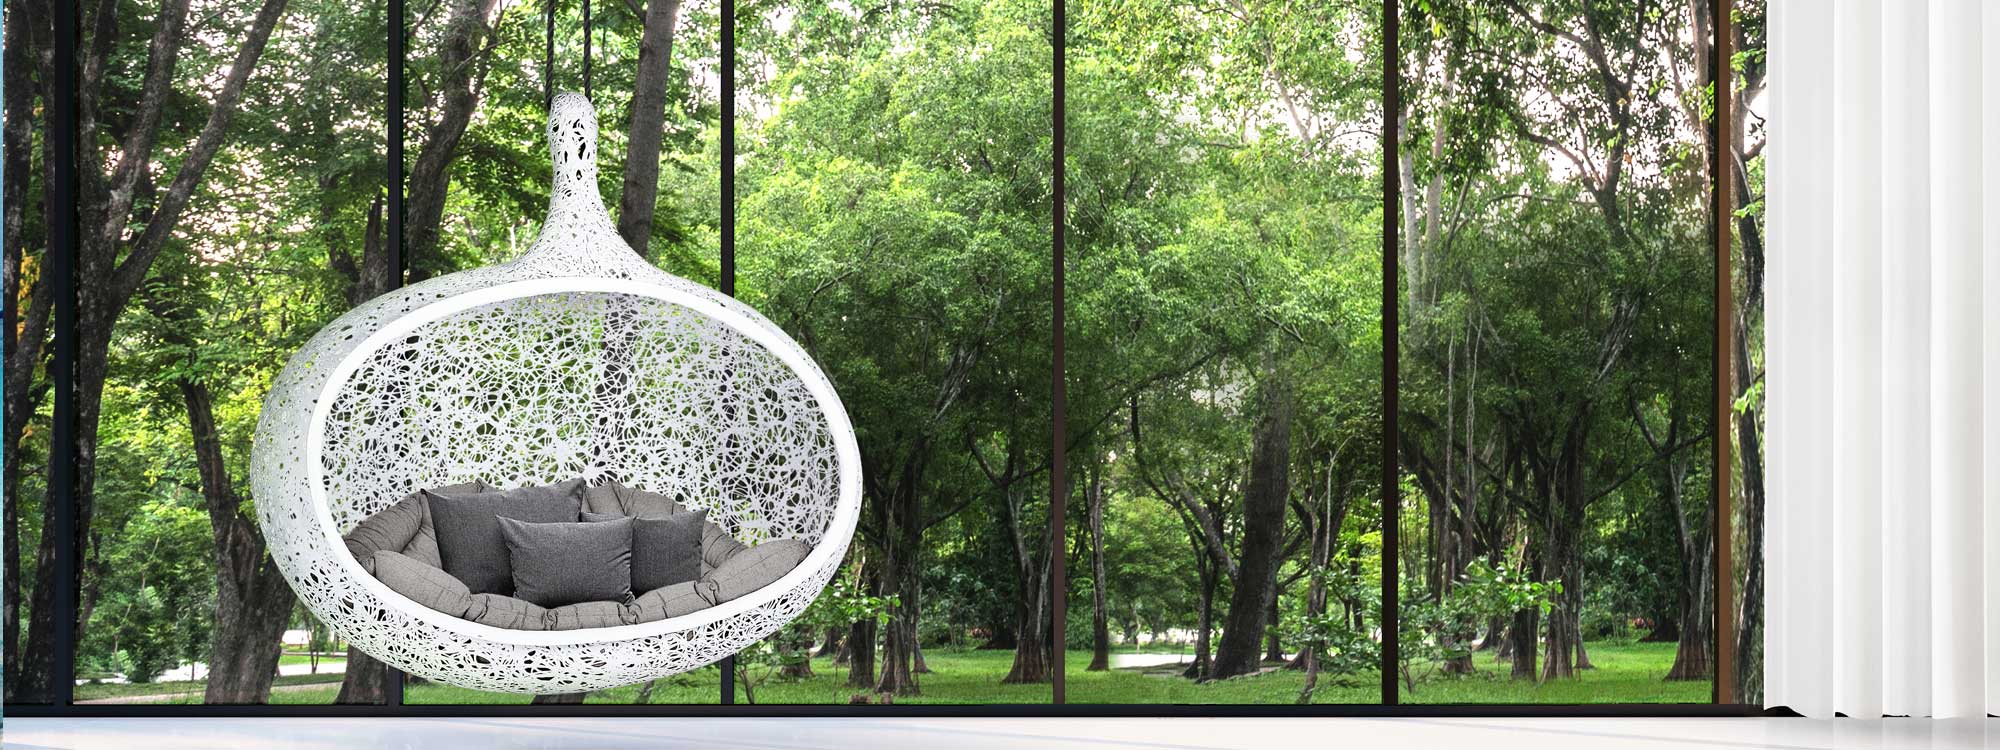 Bios Hide modern hanging garden seat pod is an awesome luxury garden swing seat & large garden swing seat & makes unique gifts for the garden.